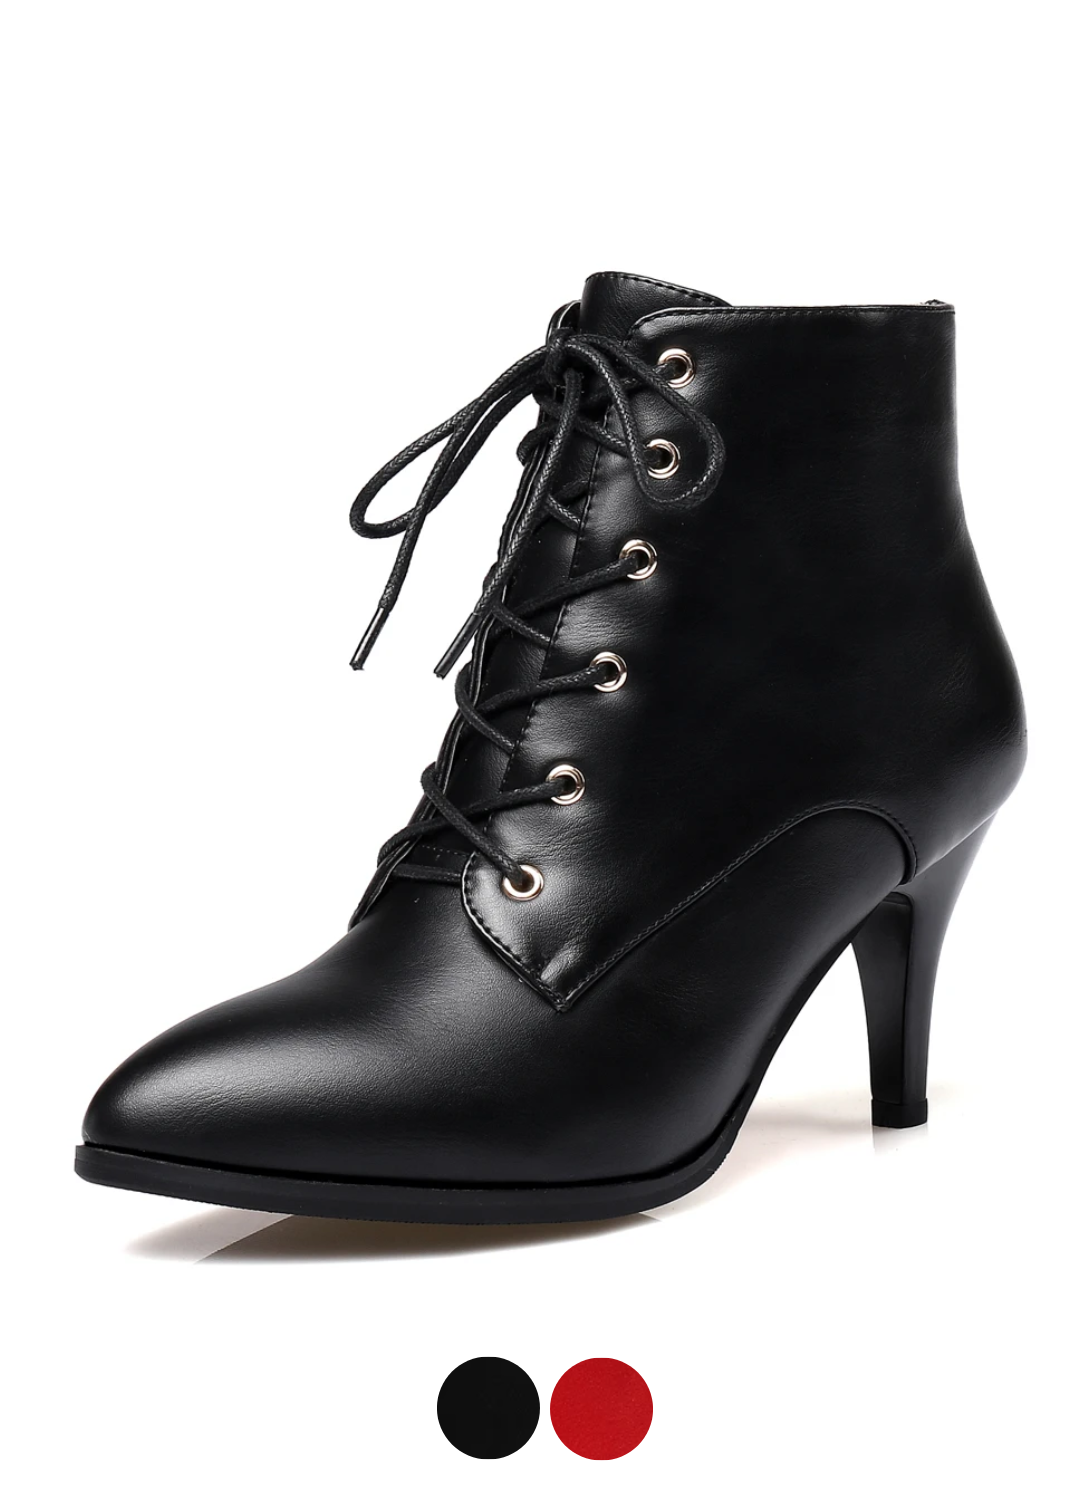 USS Shoes Luisa Women's Lace-Up Ankle Boots